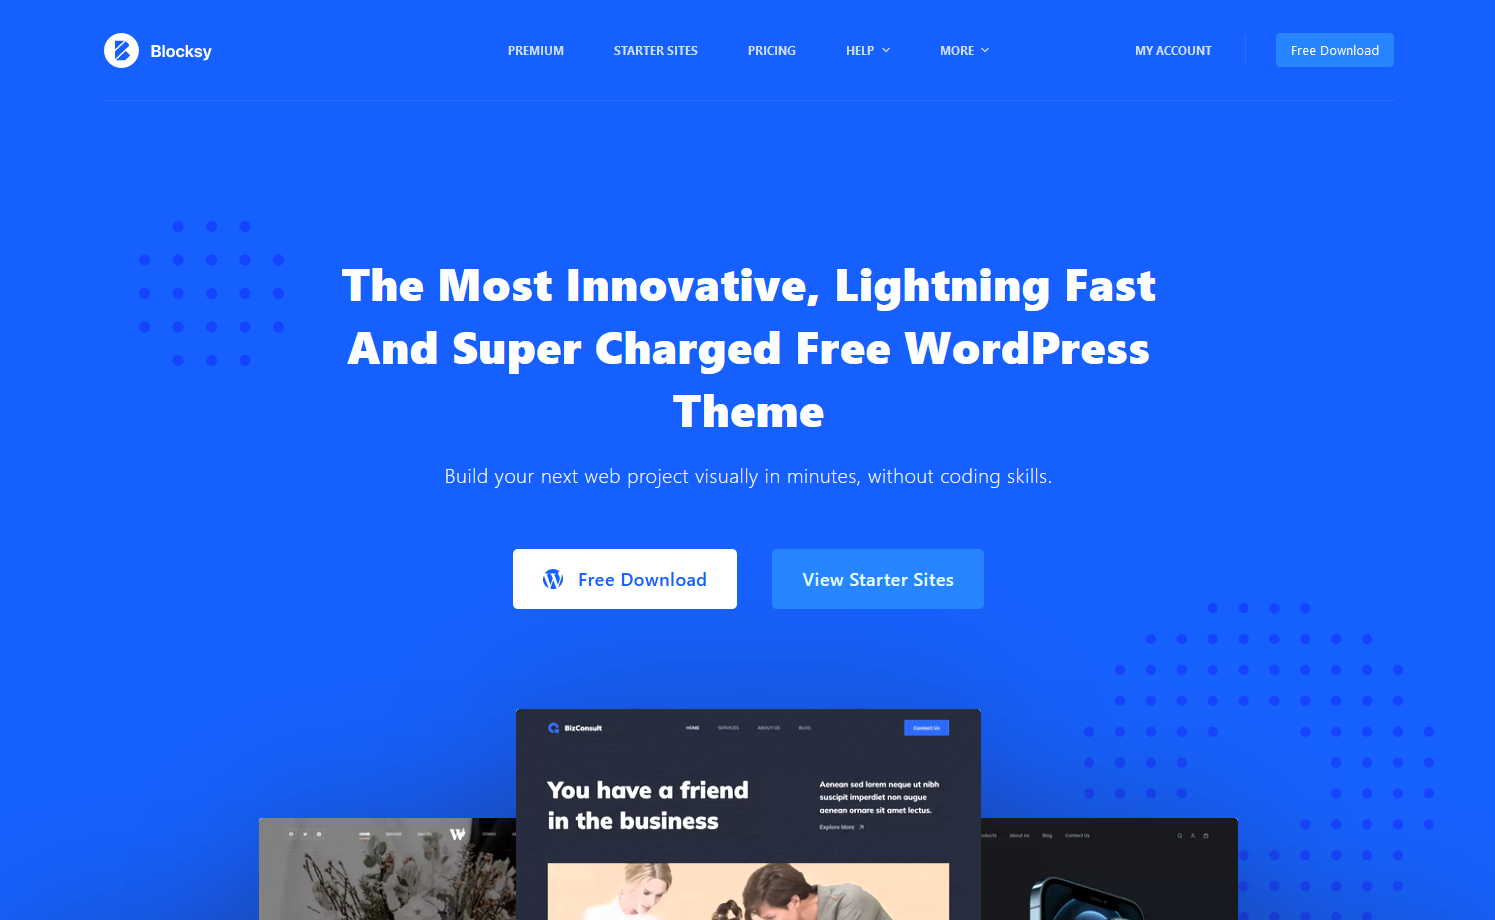 Blocksy, an example of an accessible WordPress theme, landing page screenshot